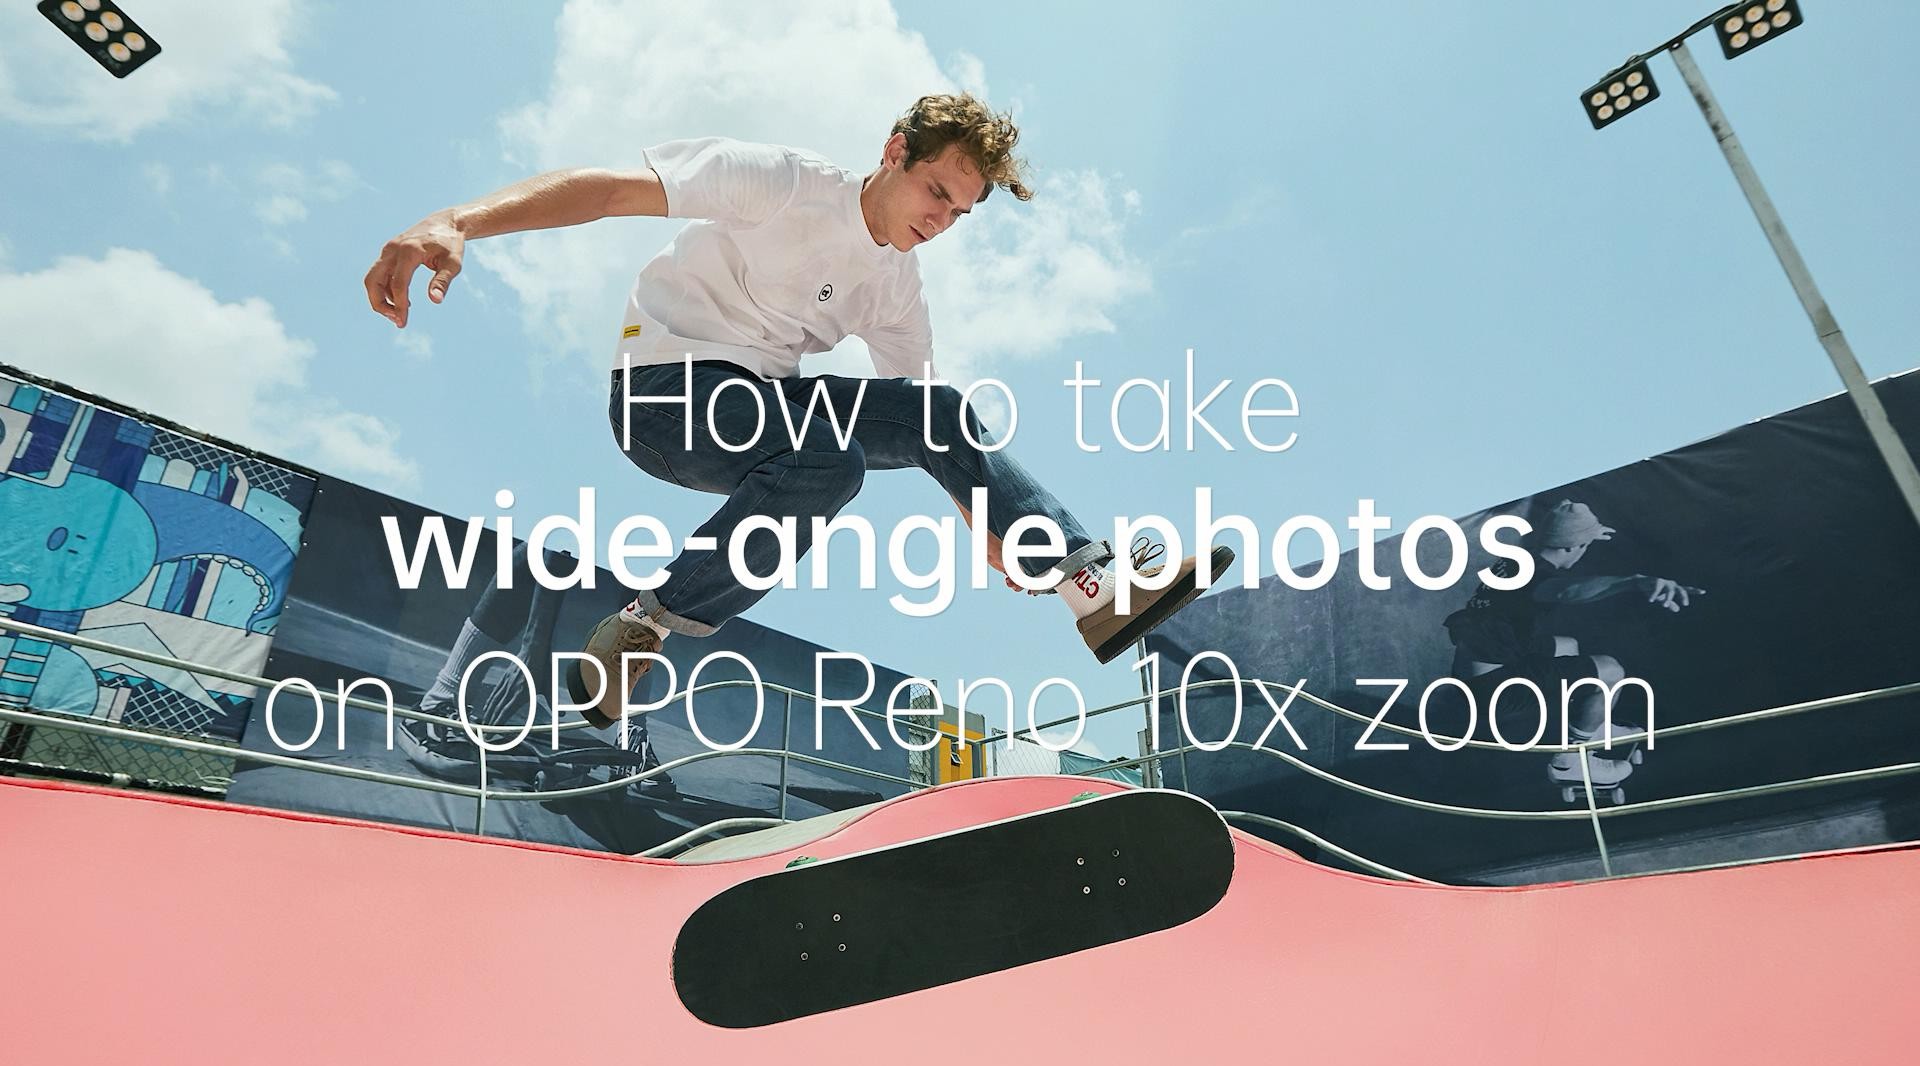 OPPO Reno How to take wide angle photos 广角教学视频 